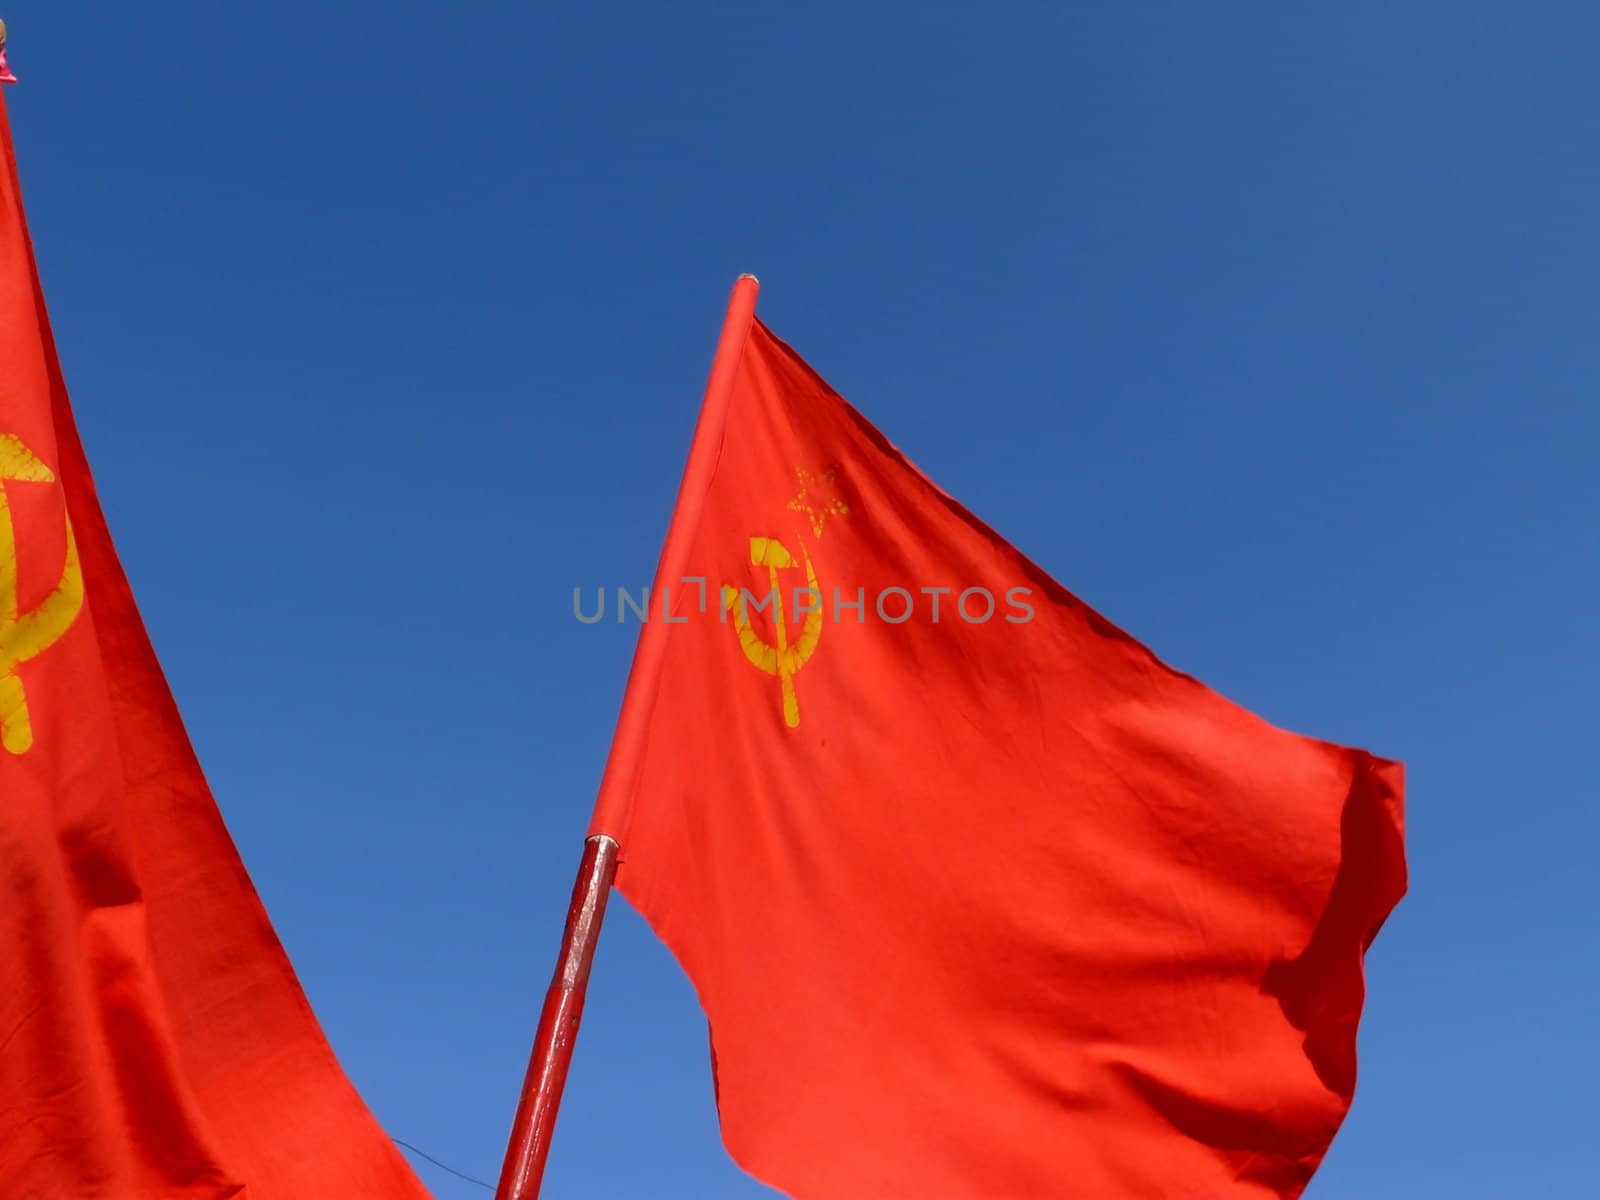 Old communistic flags with sickle and hammer